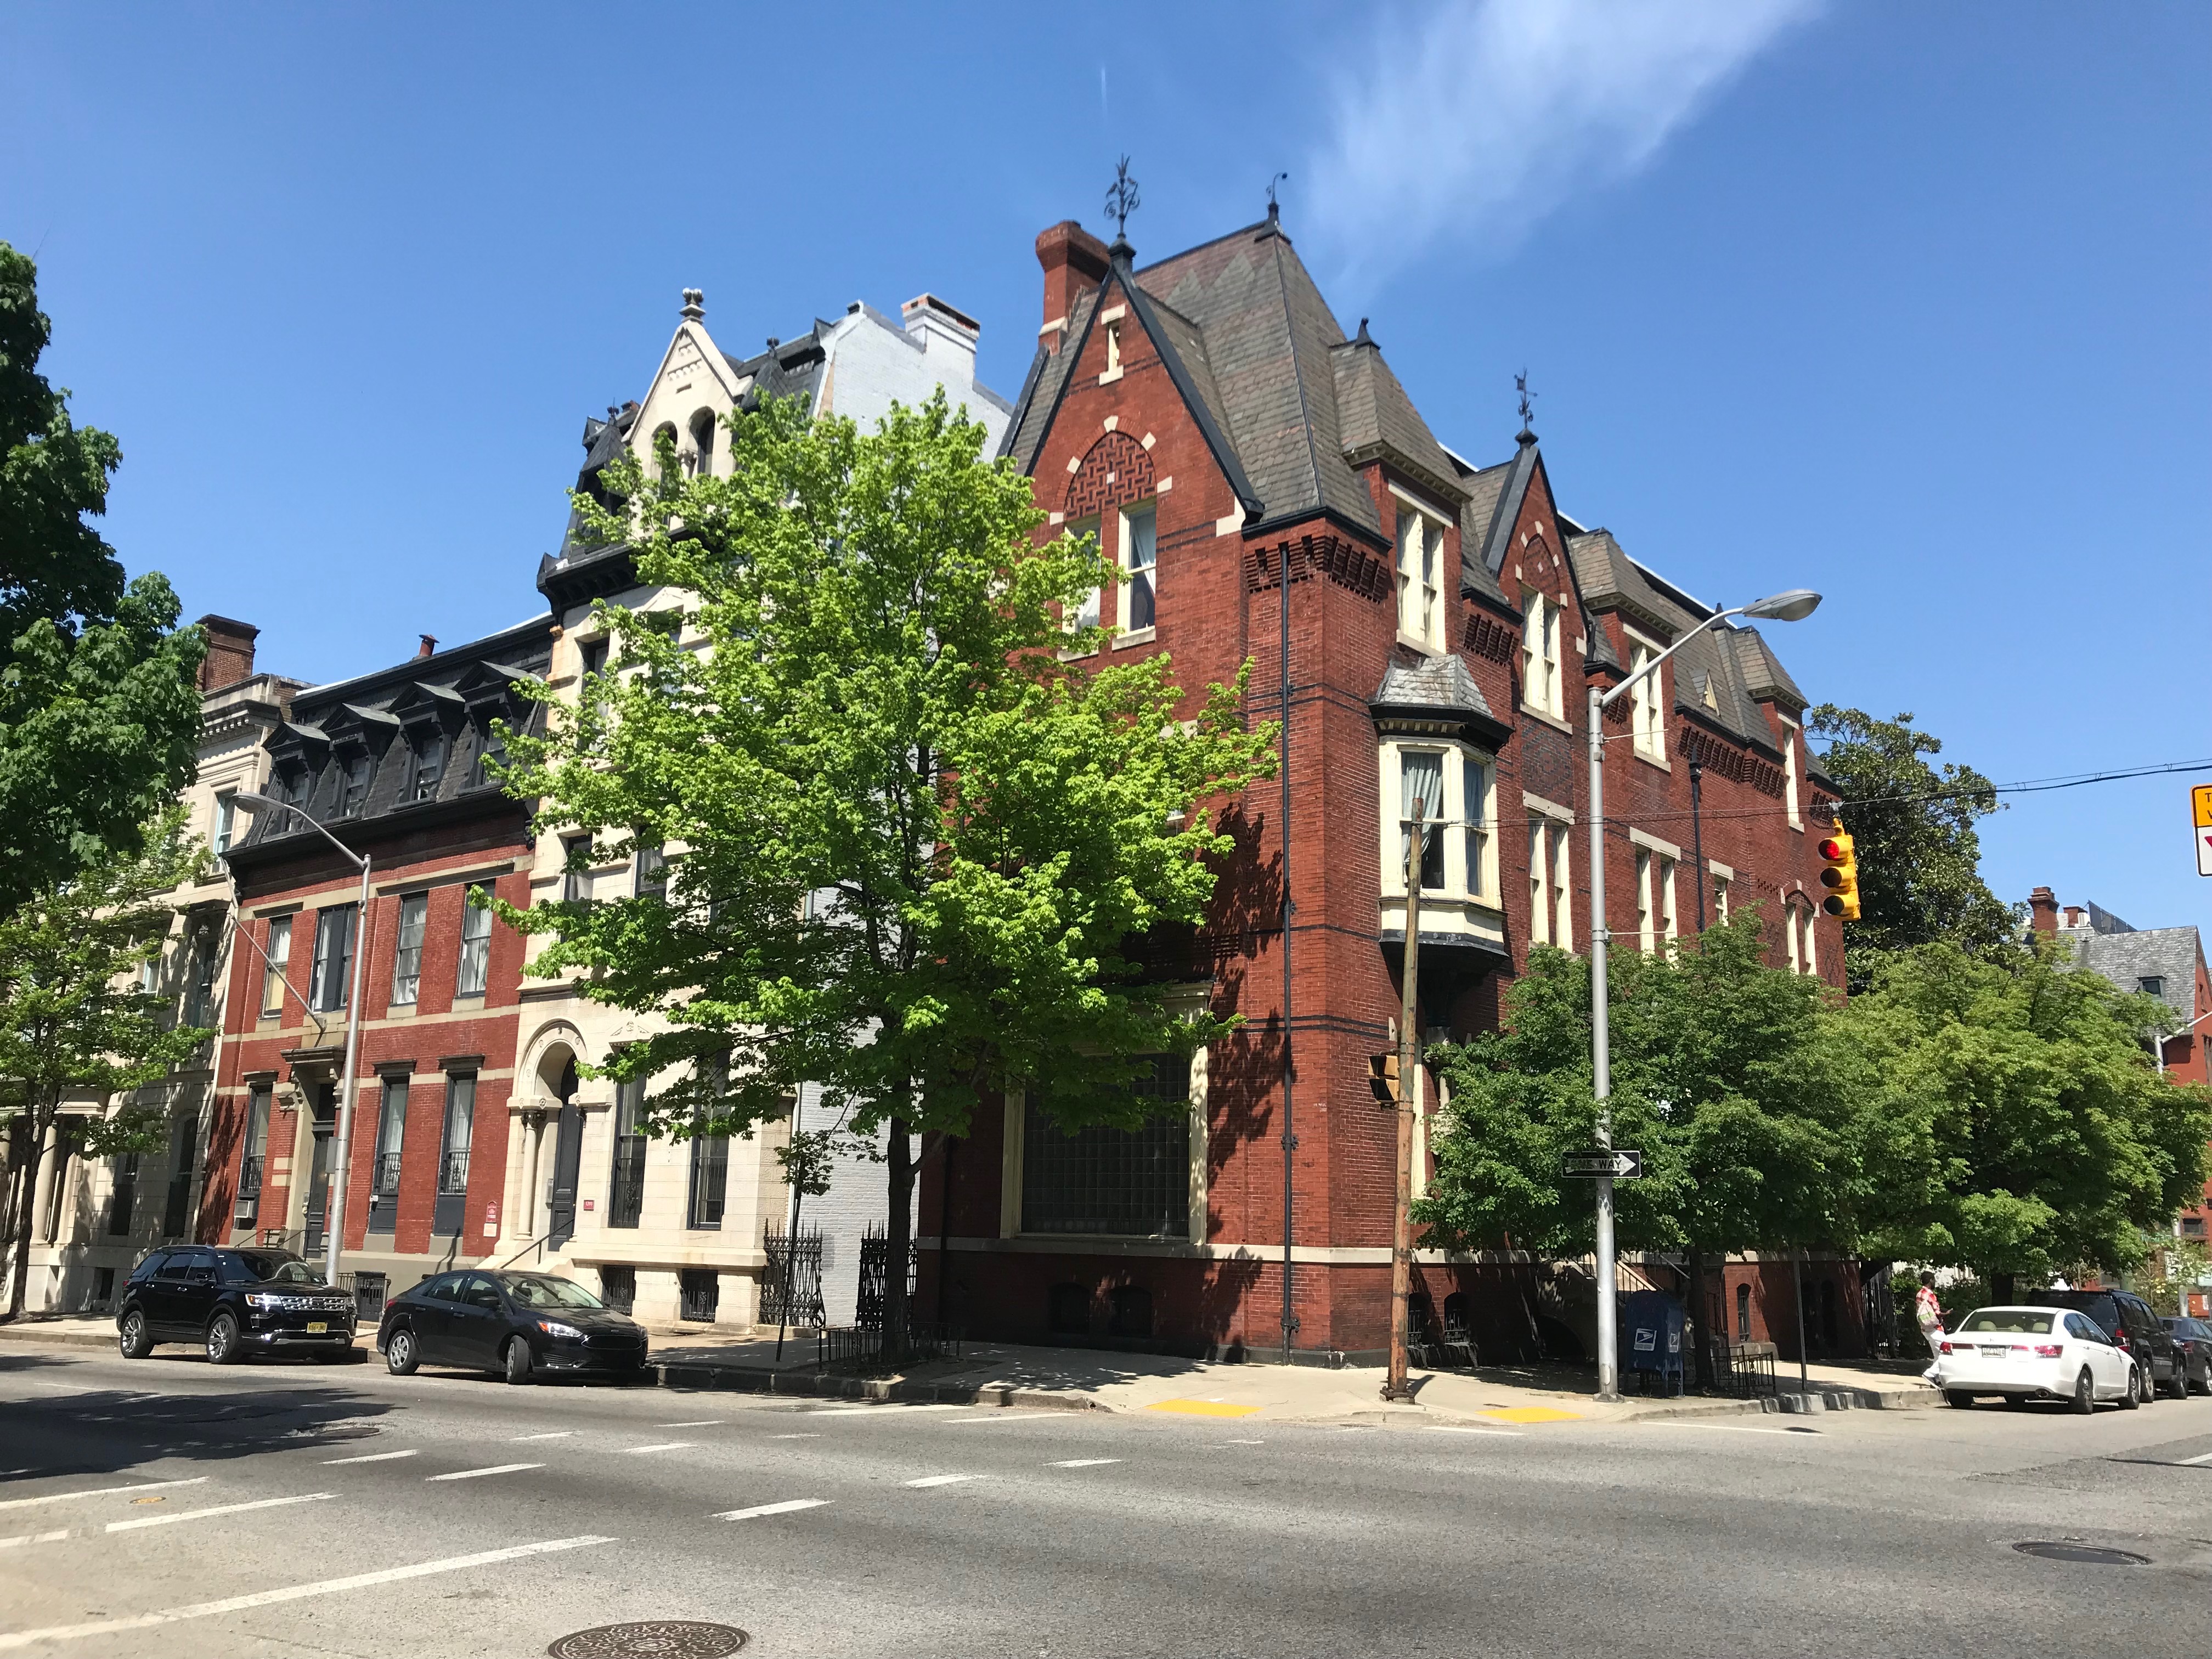 Rowhouses, Saint Paul Street and E. Biddle Street (northeast corner), Baltimore, MD 21202, Architecture, Baltimore, Baltimore City, Building, HQ Photo